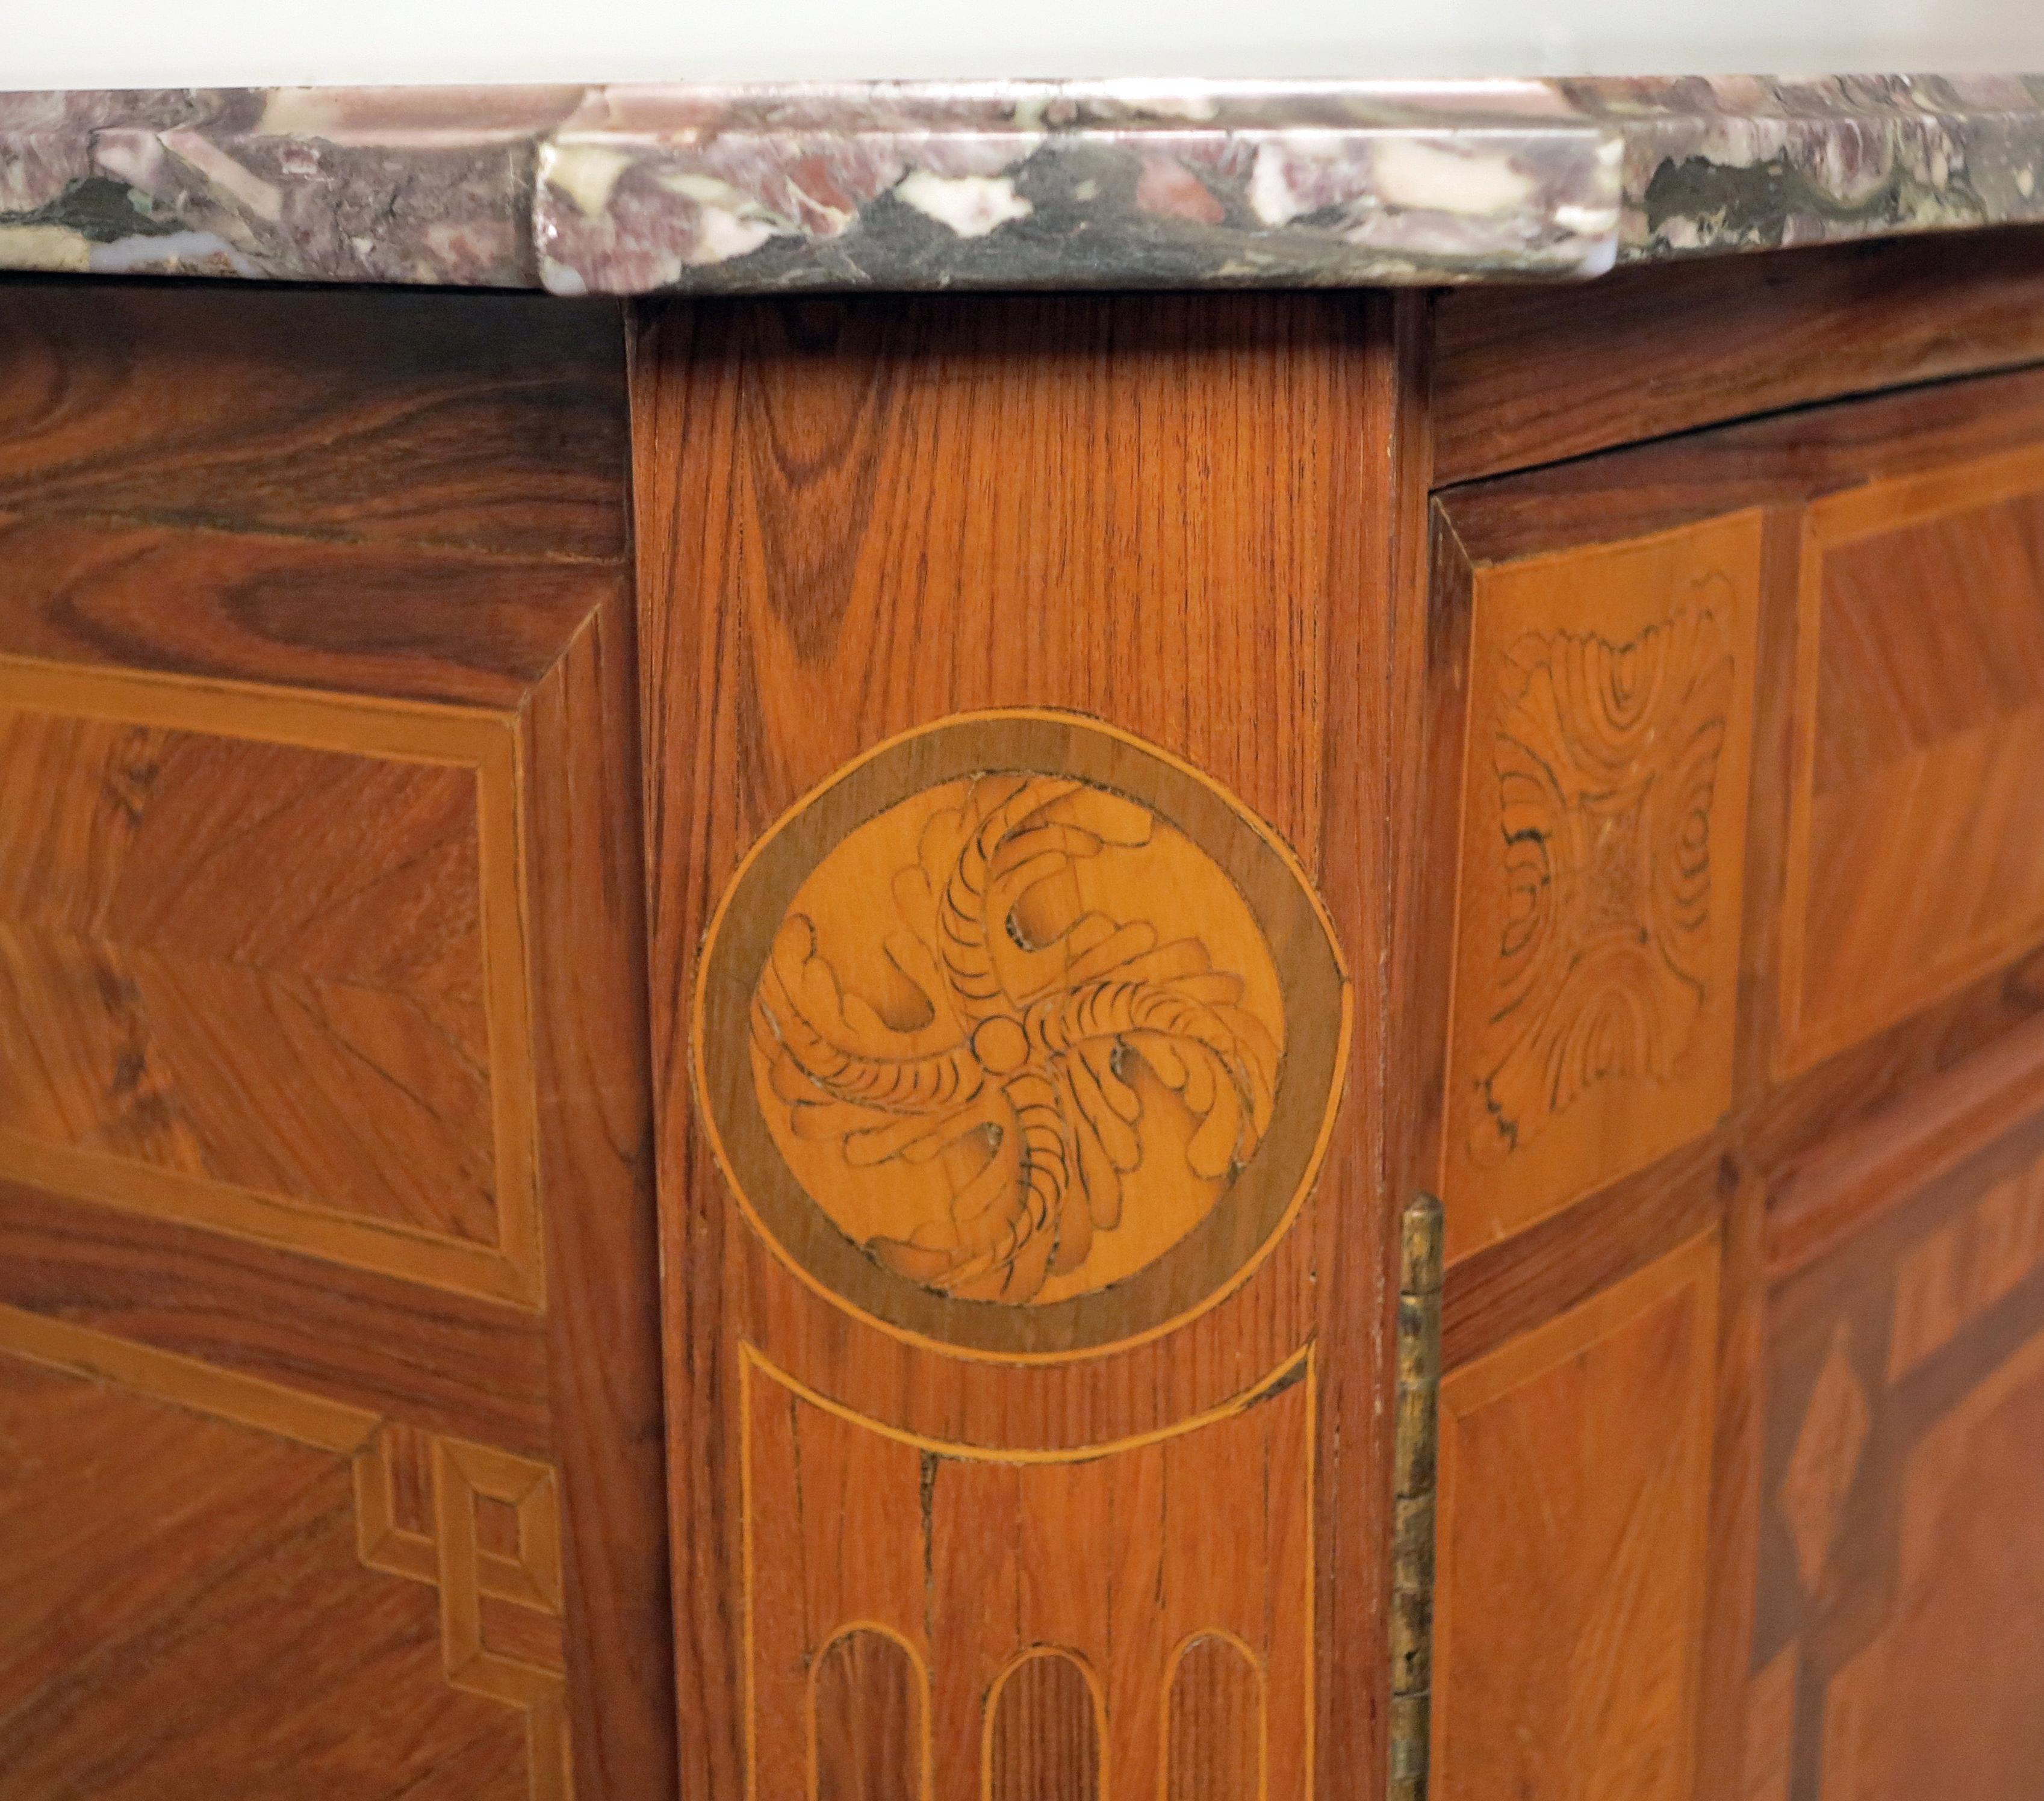 Fine Louis XVI Marquetry Inlaid Bronze Mounted Marble-Top Cabinet In Excellent Condition For Sale In Sheffield, MA